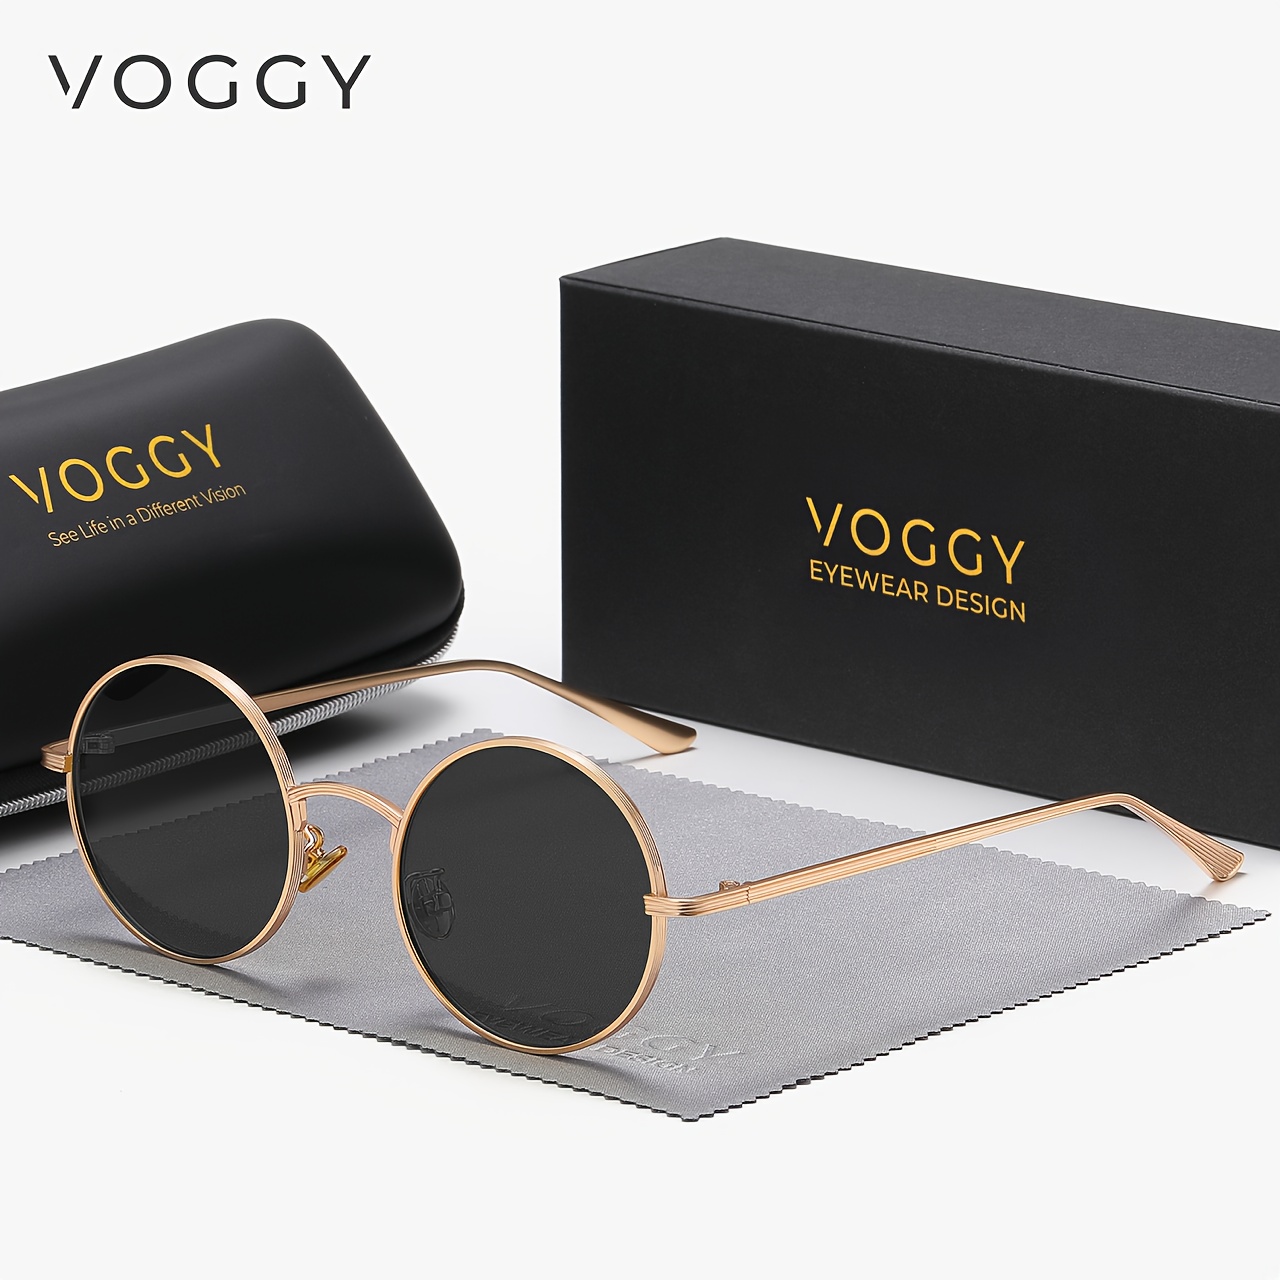 

Voggy Polarized Round Sunglasses For Women Men Vintage Fashion Metal Frame Sun Shades For Driving Beach Party With Gifts Box Mother's Day/give Gifts